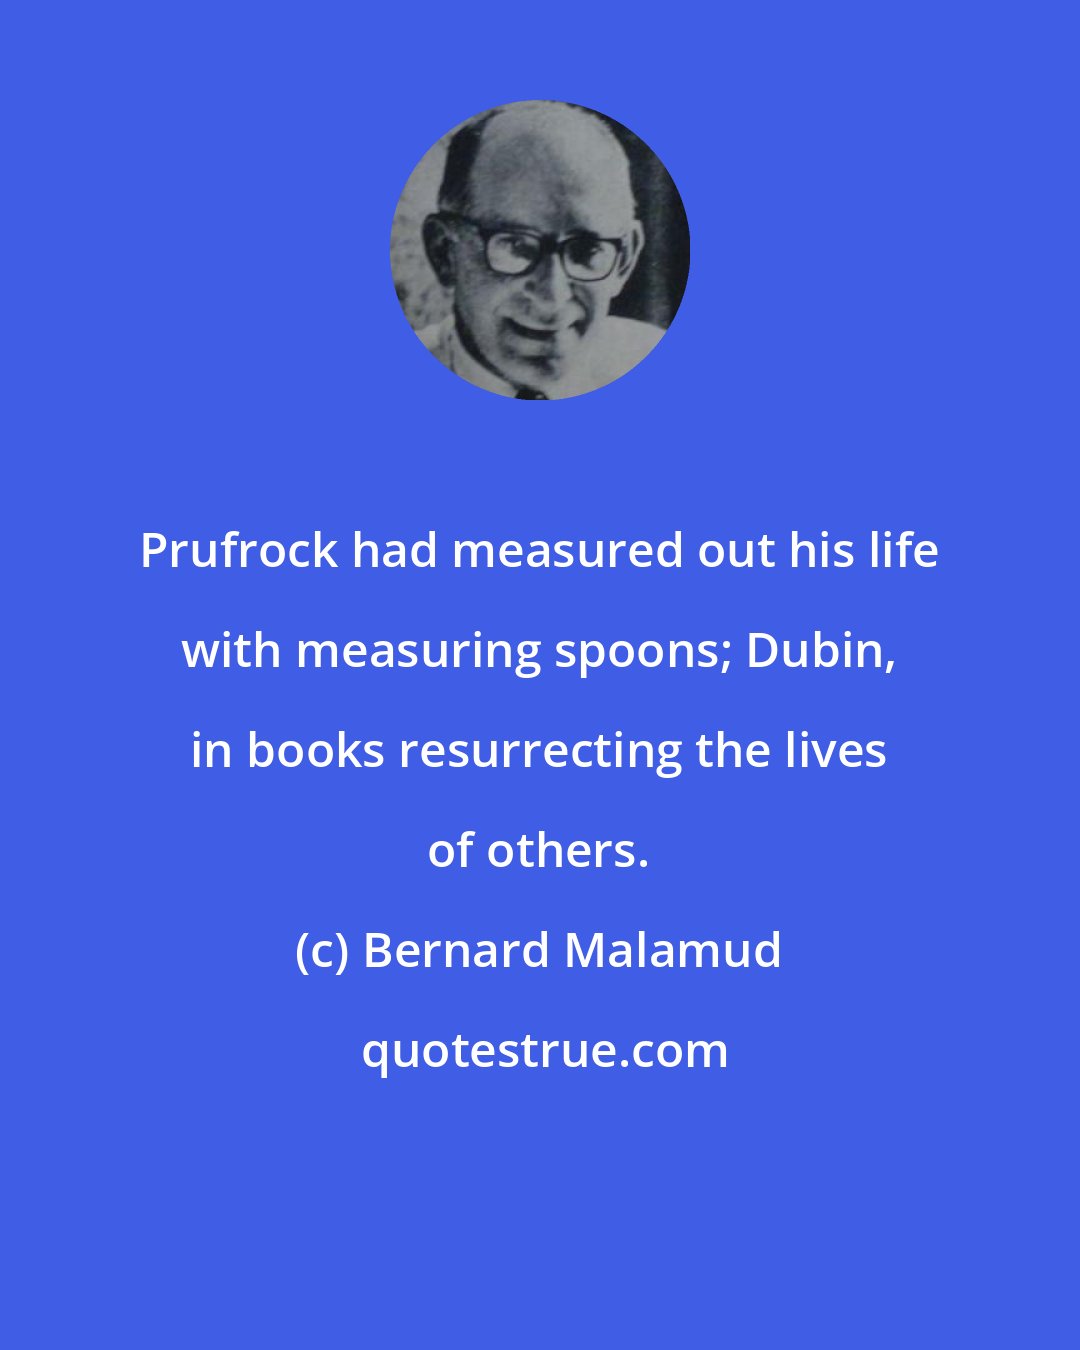 Bernard Malamud: Prufrock had measured out his life with measuring spoons; Dubin, in books resurrecting the lives of others.